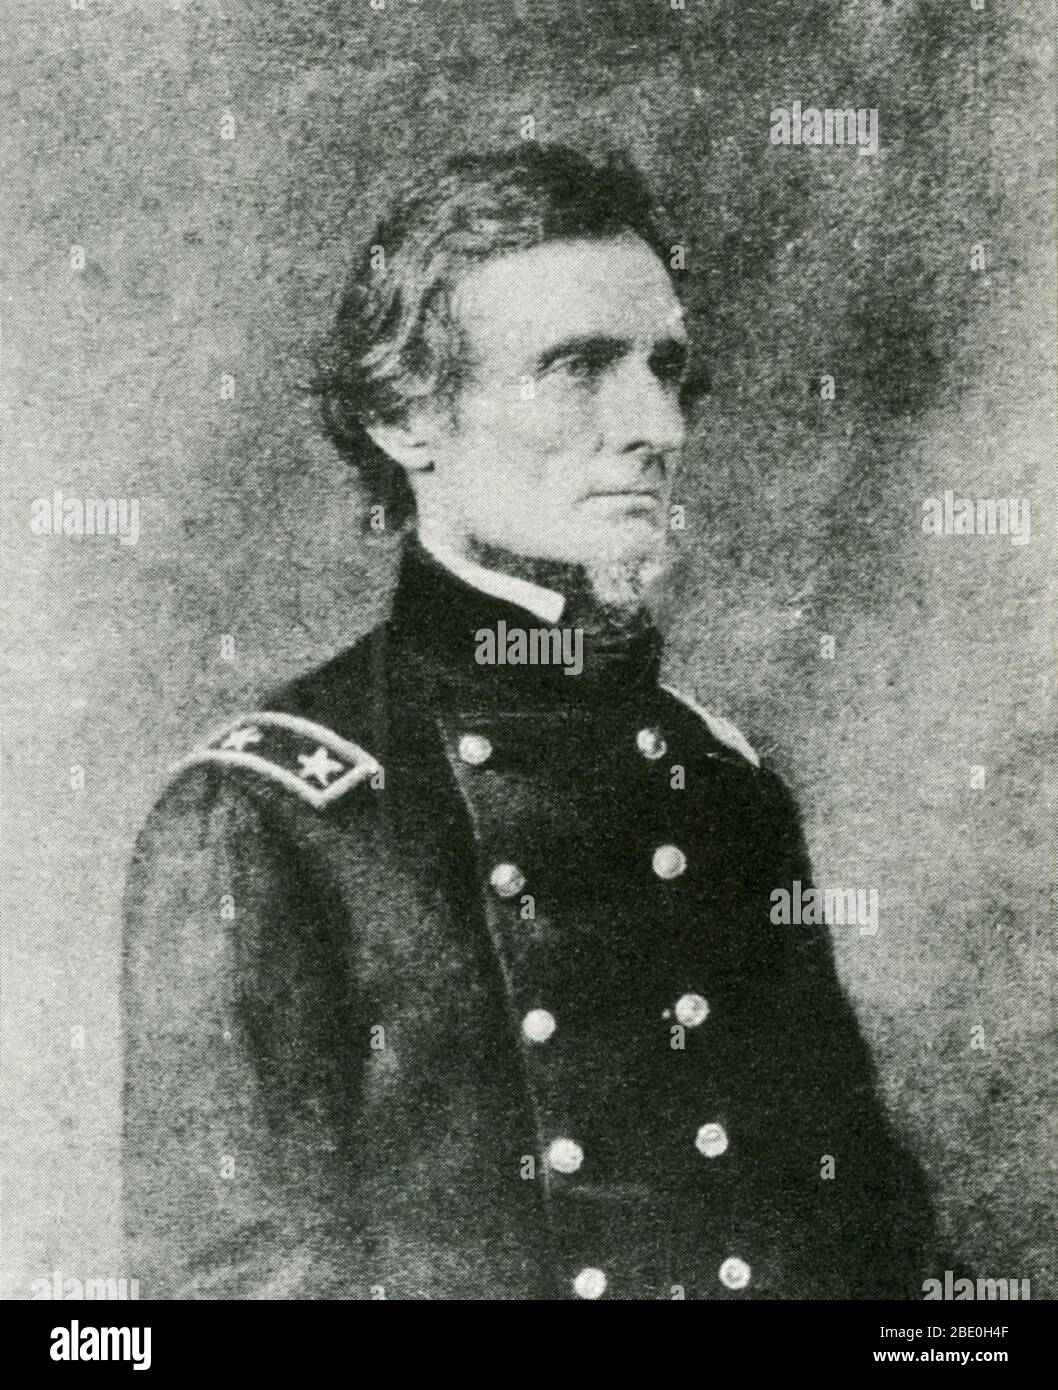 Davis in Federal uniform. Jefferson Finis Davis (June 3, 1808 - December 6, 1889) was a statesman and leader of the Confederacy during the American Civil War. He graduated from West Point and fought in the Mexican-American War as a colonel of a volunteer regiment. He was Secretary of War under President Pierce and a senator representing Mississippi. He argued against secession, but agreed that each state was sovereign and had the right to secede from the Union. He was selected as provisional President of the CSA and was elected without opposition to a six-year term. Davis took charge of the Co Stock Photo